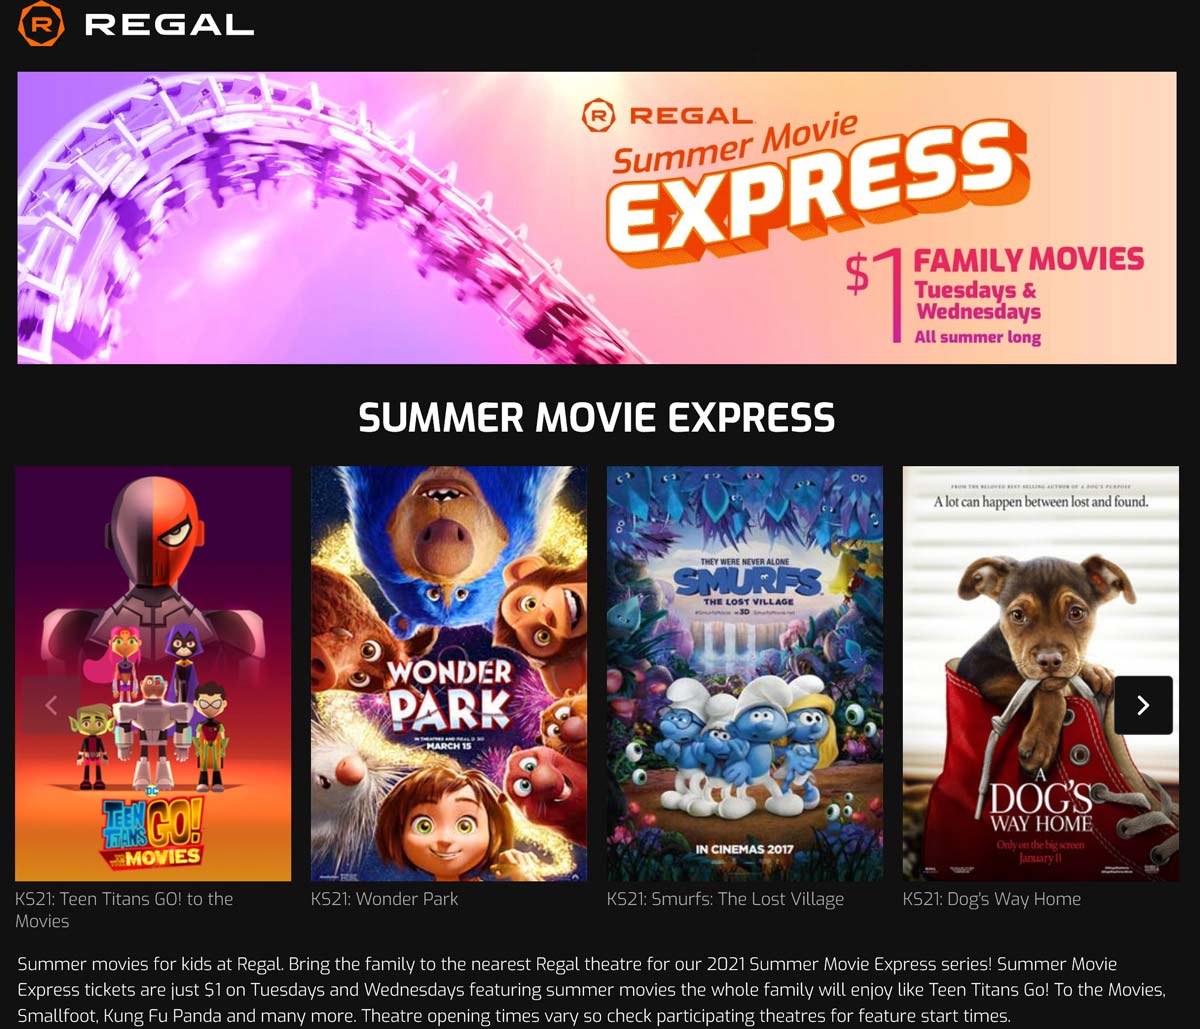 Regal Cinemas stores Coupon  $1 family movies Tues & Weds all summer at Regal Cinemas #regalcinemas 